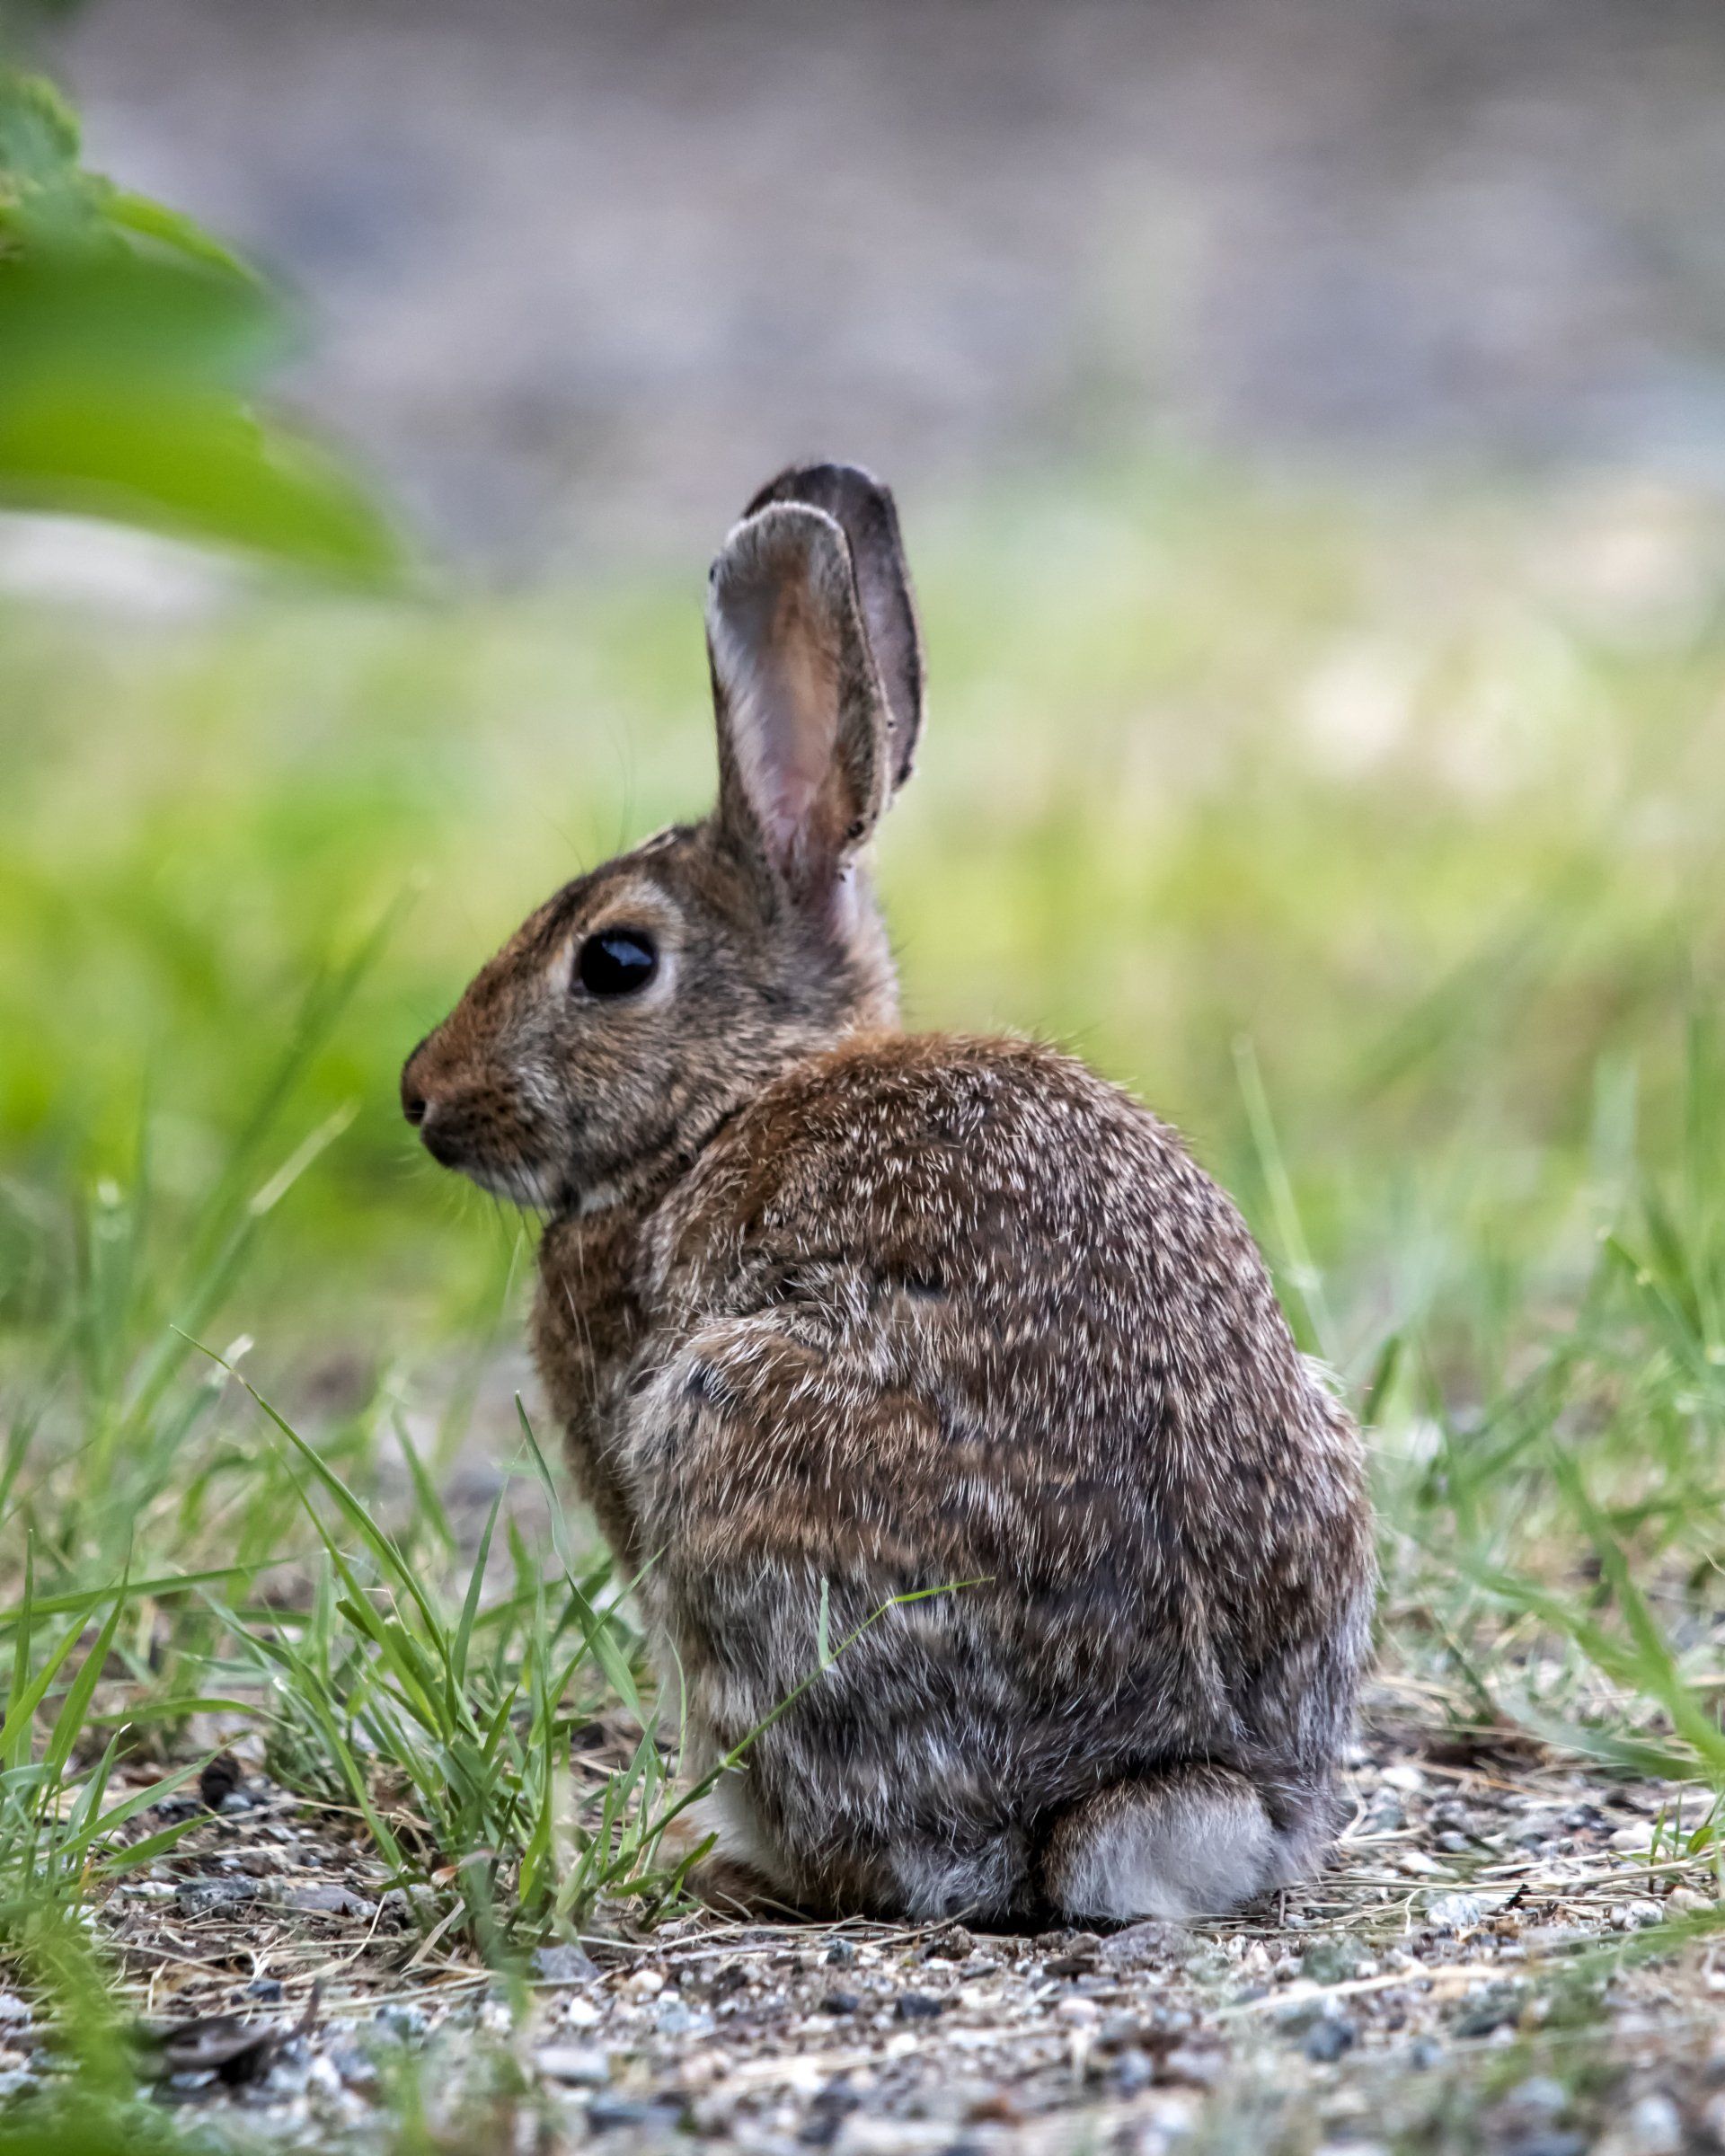 Rabbit control and trapping